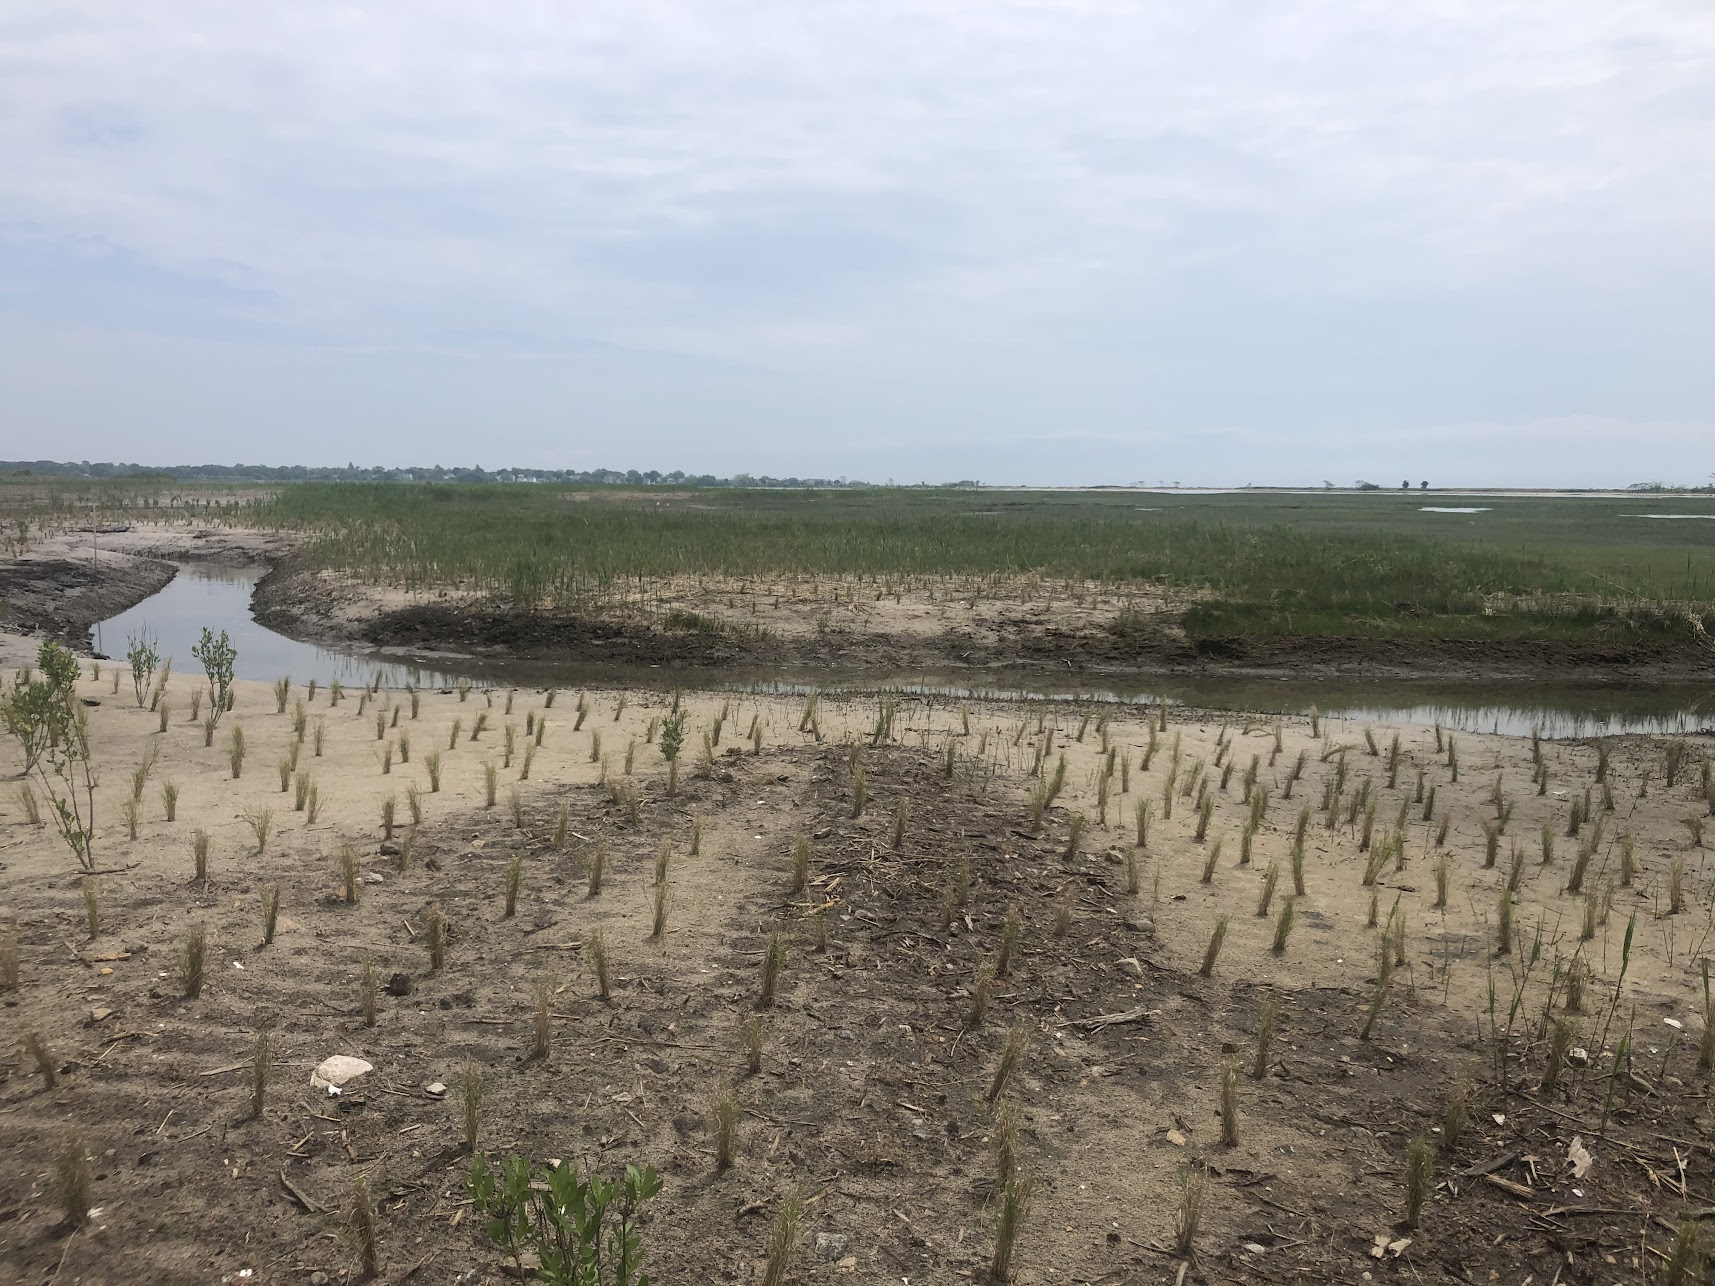 Growing patches of saltgrass (Distichlis spicata) are spread out across at a newly-restored section of Great Meadows Marsh in Stratford, Connecticut. Behind the plants is the new tidal channel, shown bringing saltwater into the marsh during high tide.